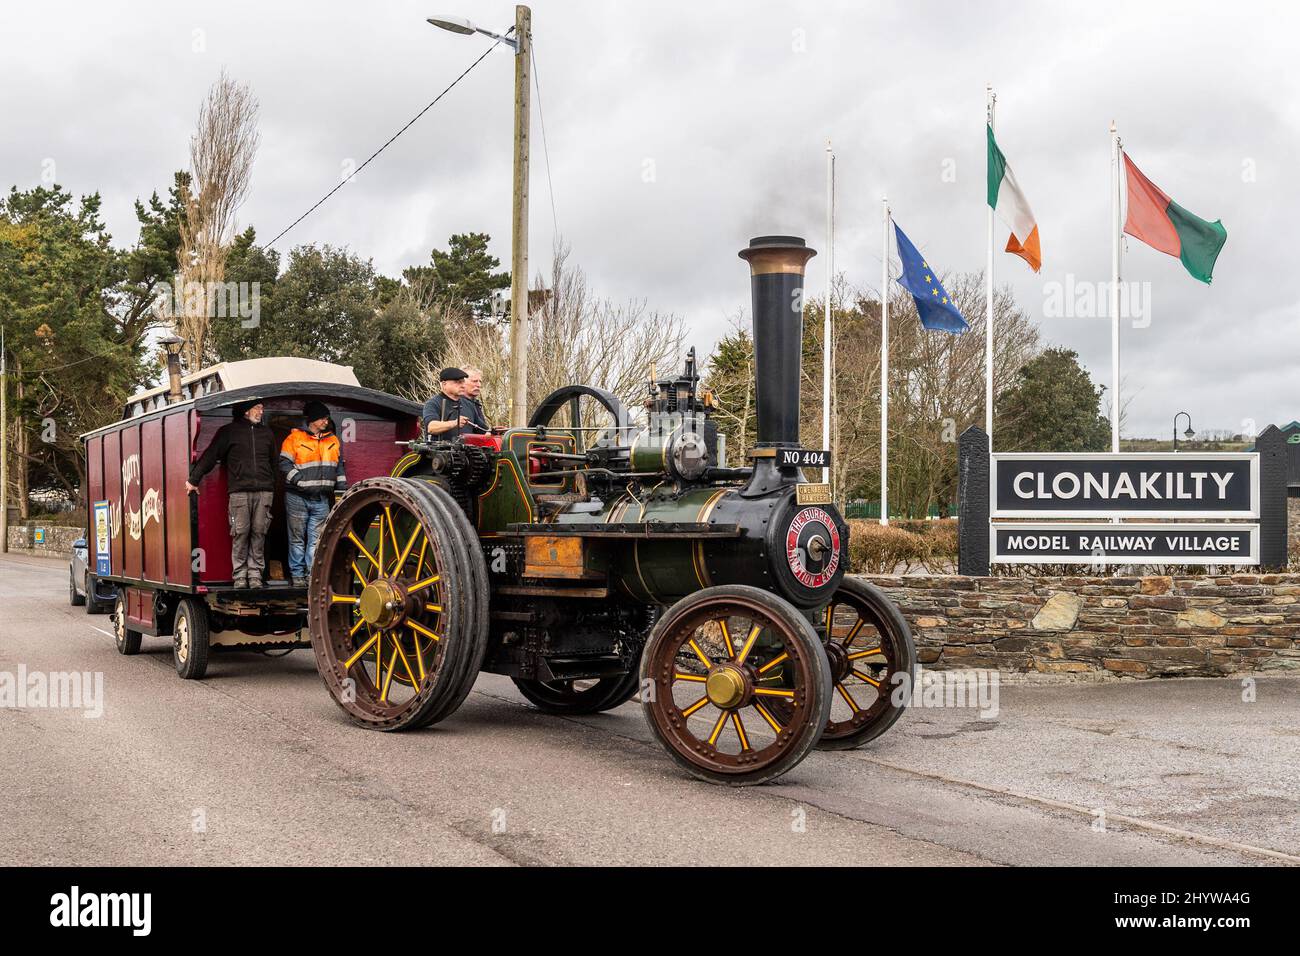 Clonakilty, West Cork, Ireland. 14th Mar, 2022. Steam traction engines set out from Rosscarbery today, continuing on their journey to the St. Patrick's Day parade in Kinsale on Thursday in aid of the RNLI. The traction engines arrived at Clonakilty Model Railway Village for a break before heading into Clonakilty town to raise funds for the RNLI. Credit: AG News/Alamy Live News Stock Photo